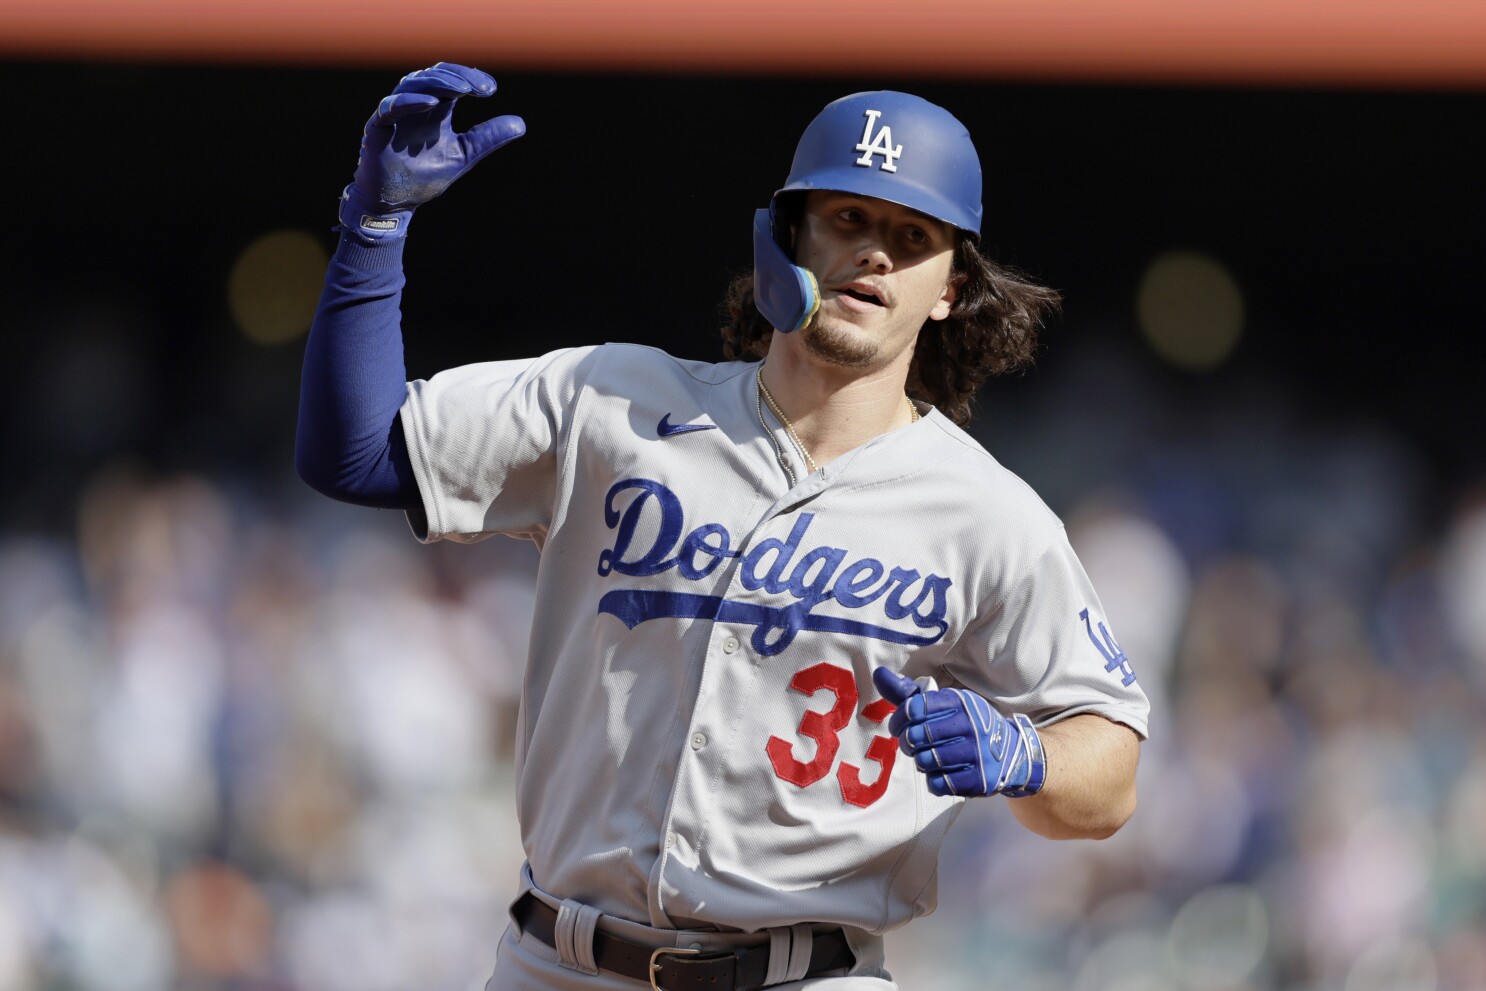 Dodgers keep rolling with 6-1 win against Mariners, one day after